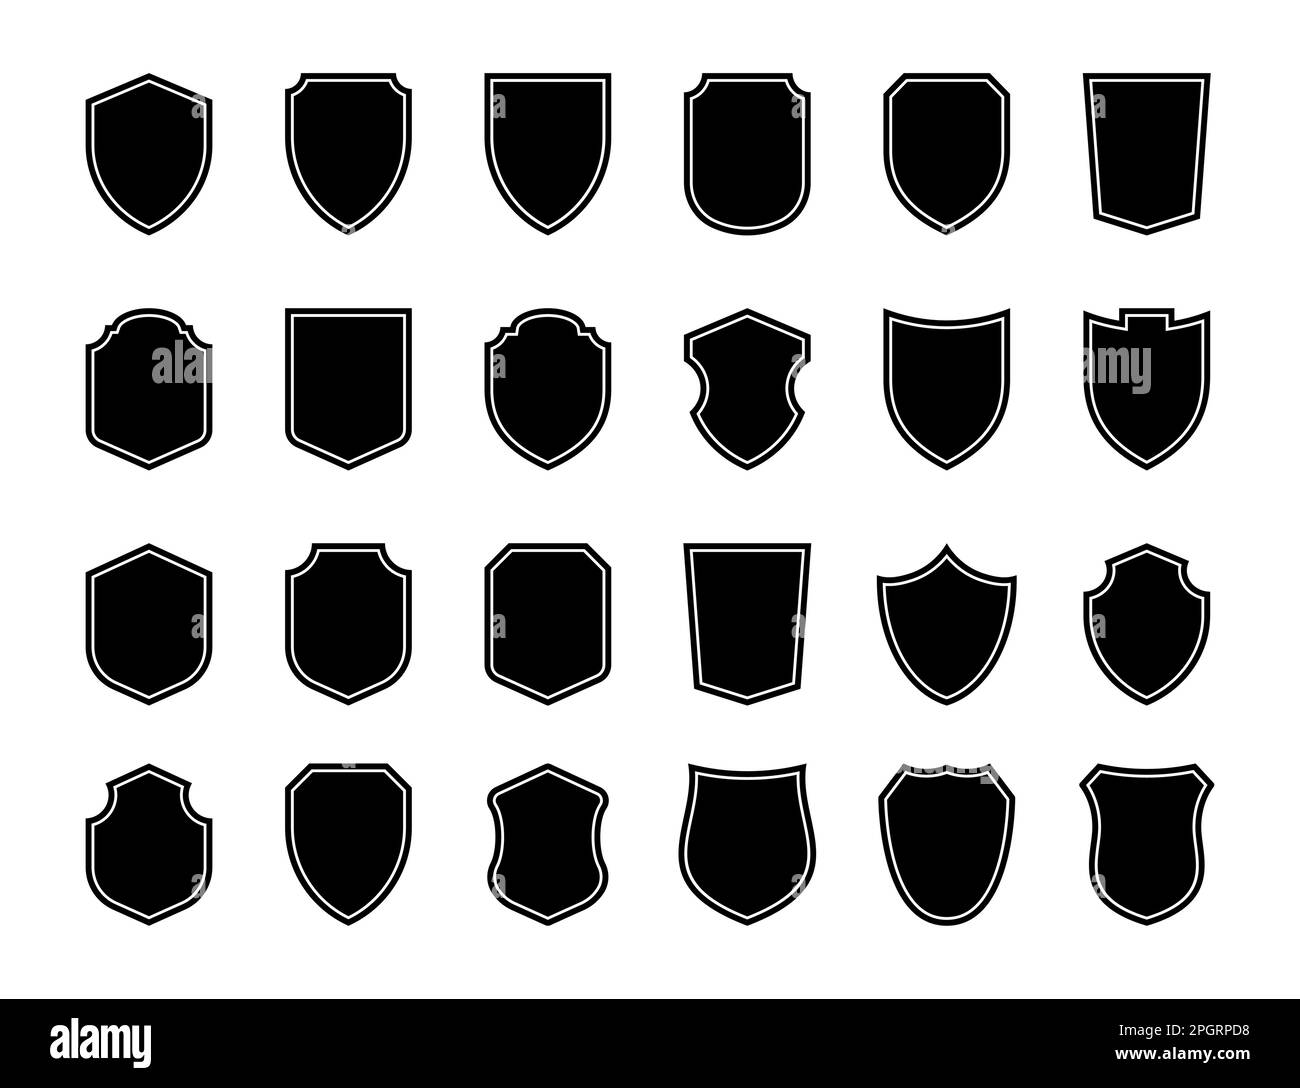 Set of shields. Protect signs. Knight award. Security label Stock Vector